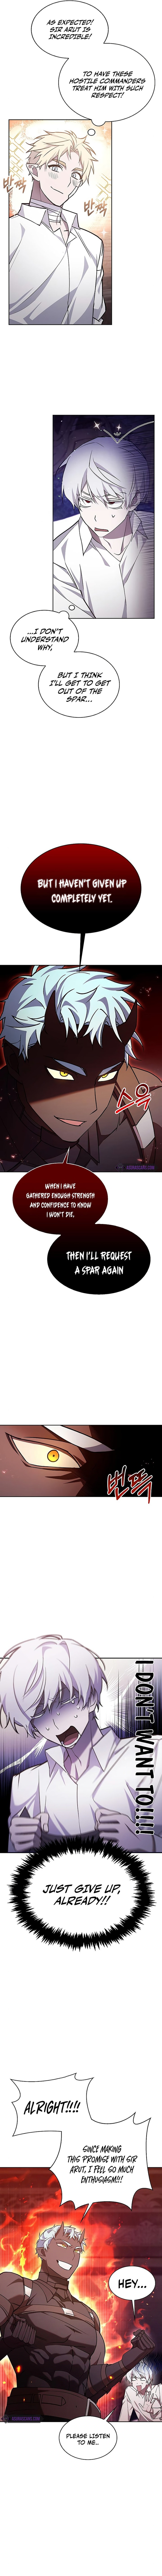 Im Not That Kind Of Talent Chapter 5 Page 5